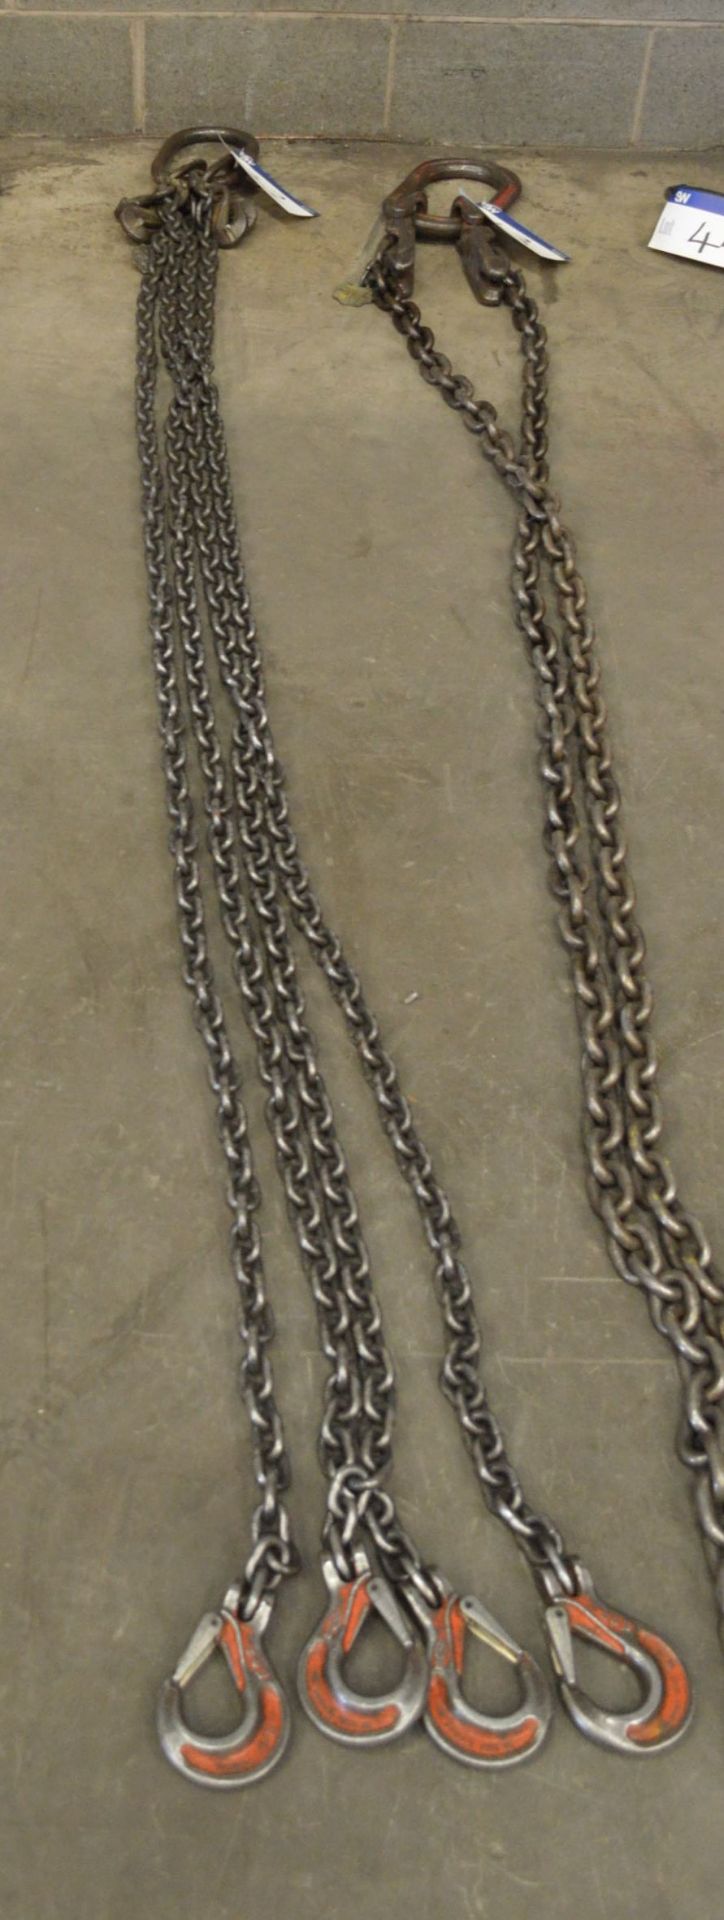 Pewag Four Leg Chain Sling, approx. 2.9m long, with tensioners